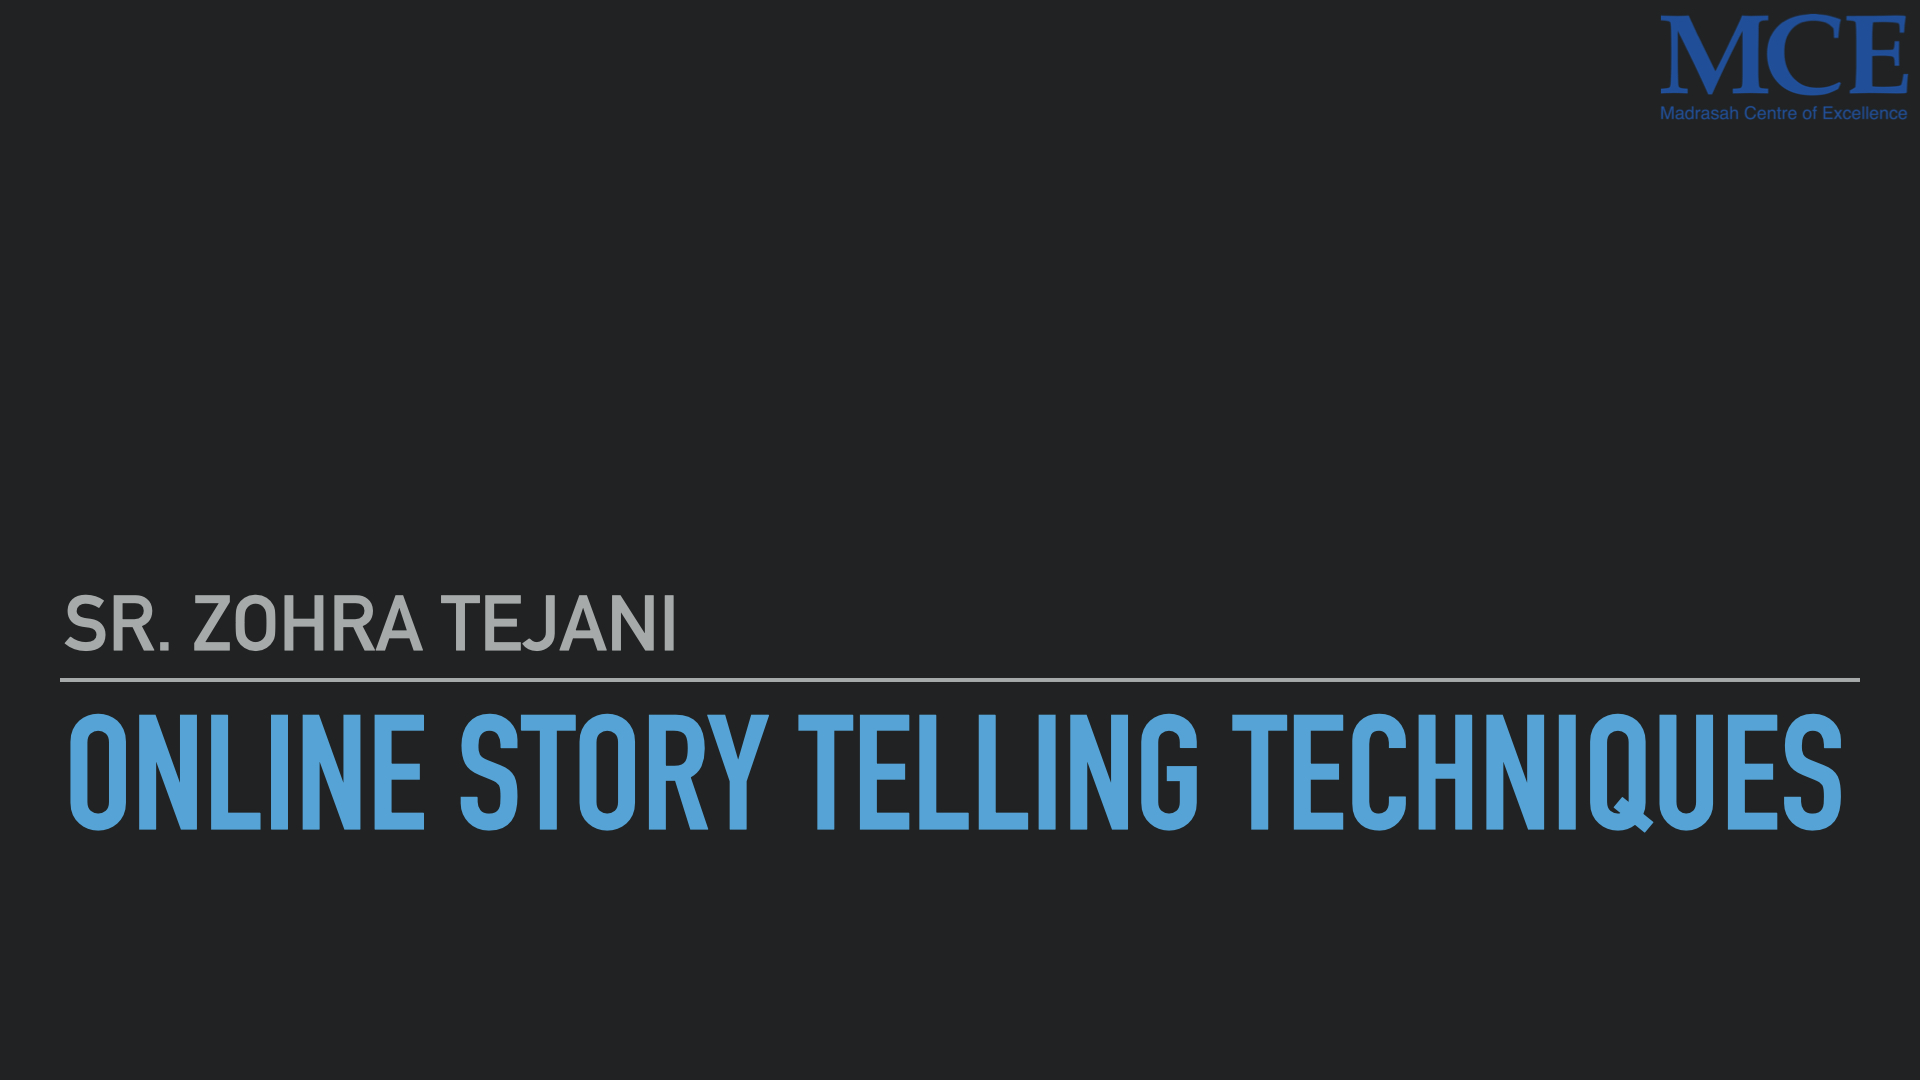 Online story telling techniques